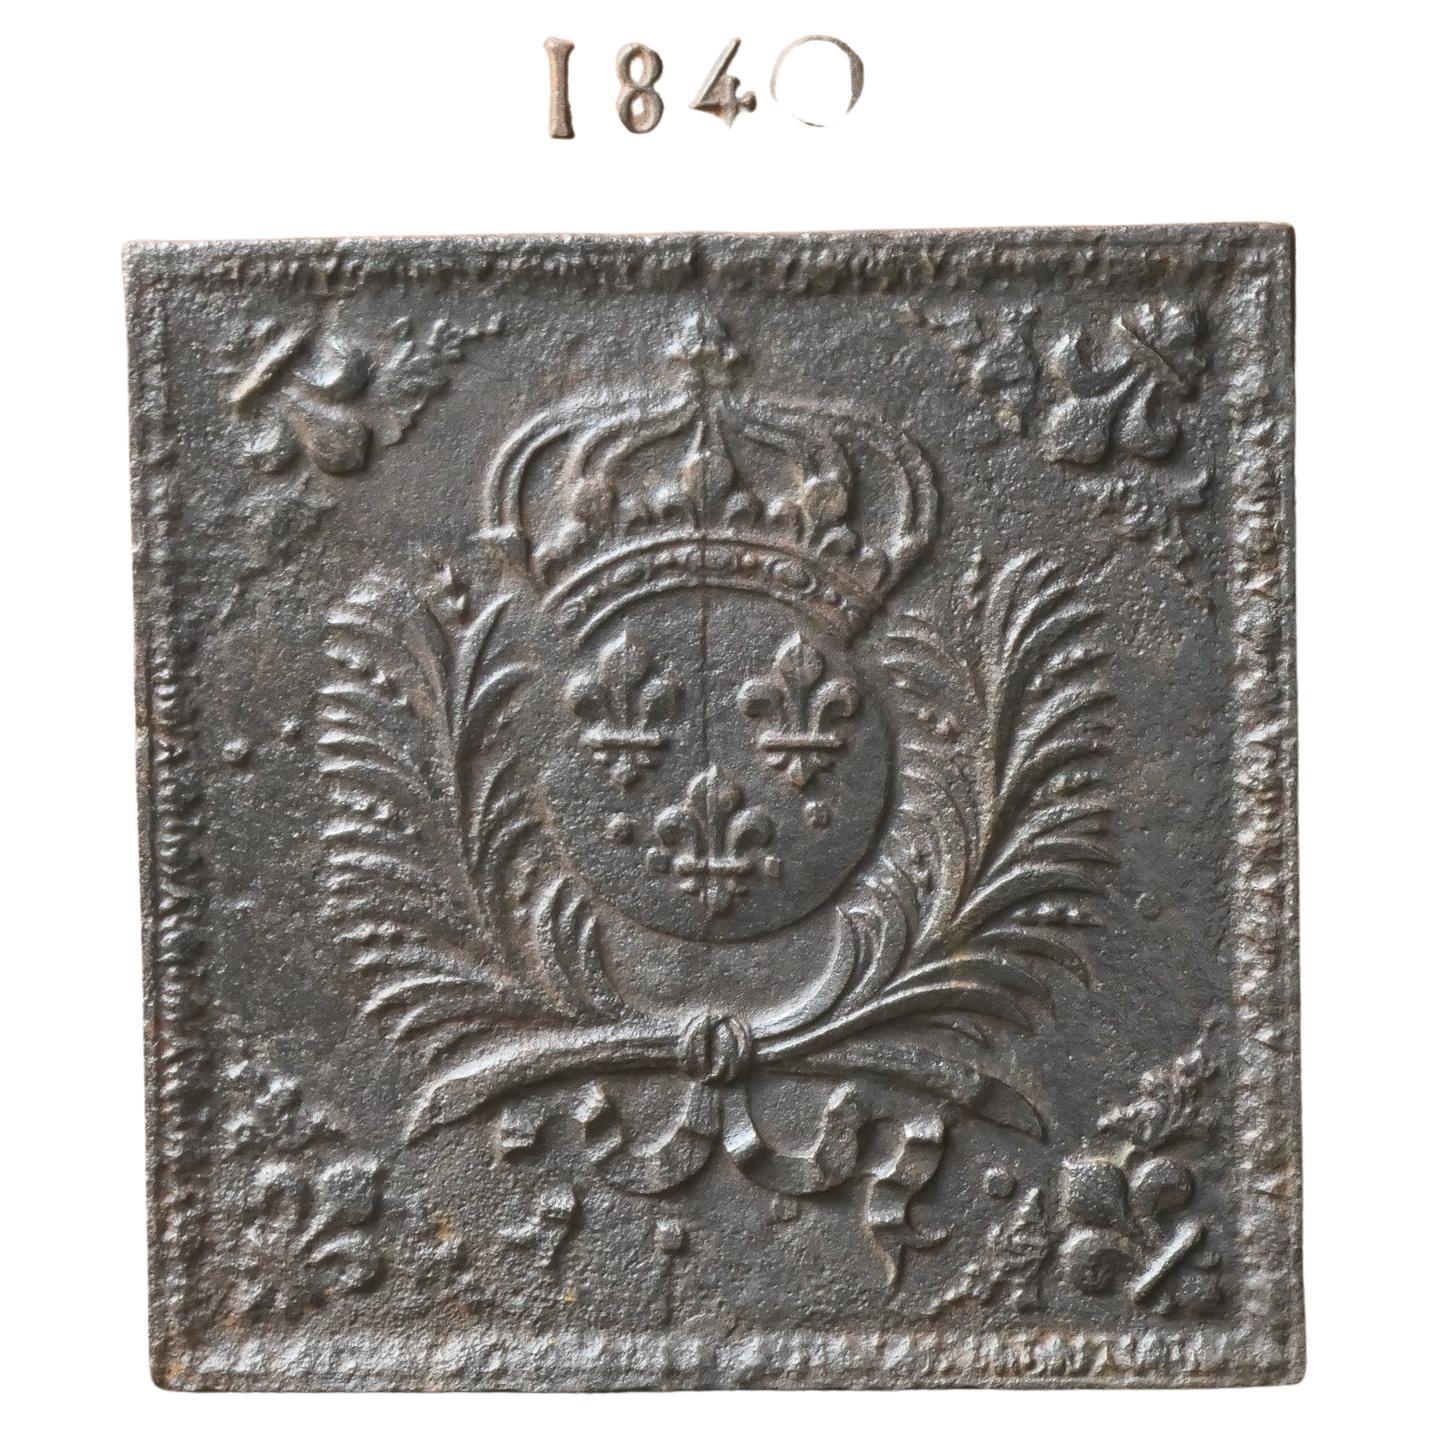 17th century French Louis XIV period fireback with the Arms of France. A coat of arms of the House of Bourbon, an originally French royal house that became a major dynasty in Europe. The house delivered kings for Spain (Navarra), France, both